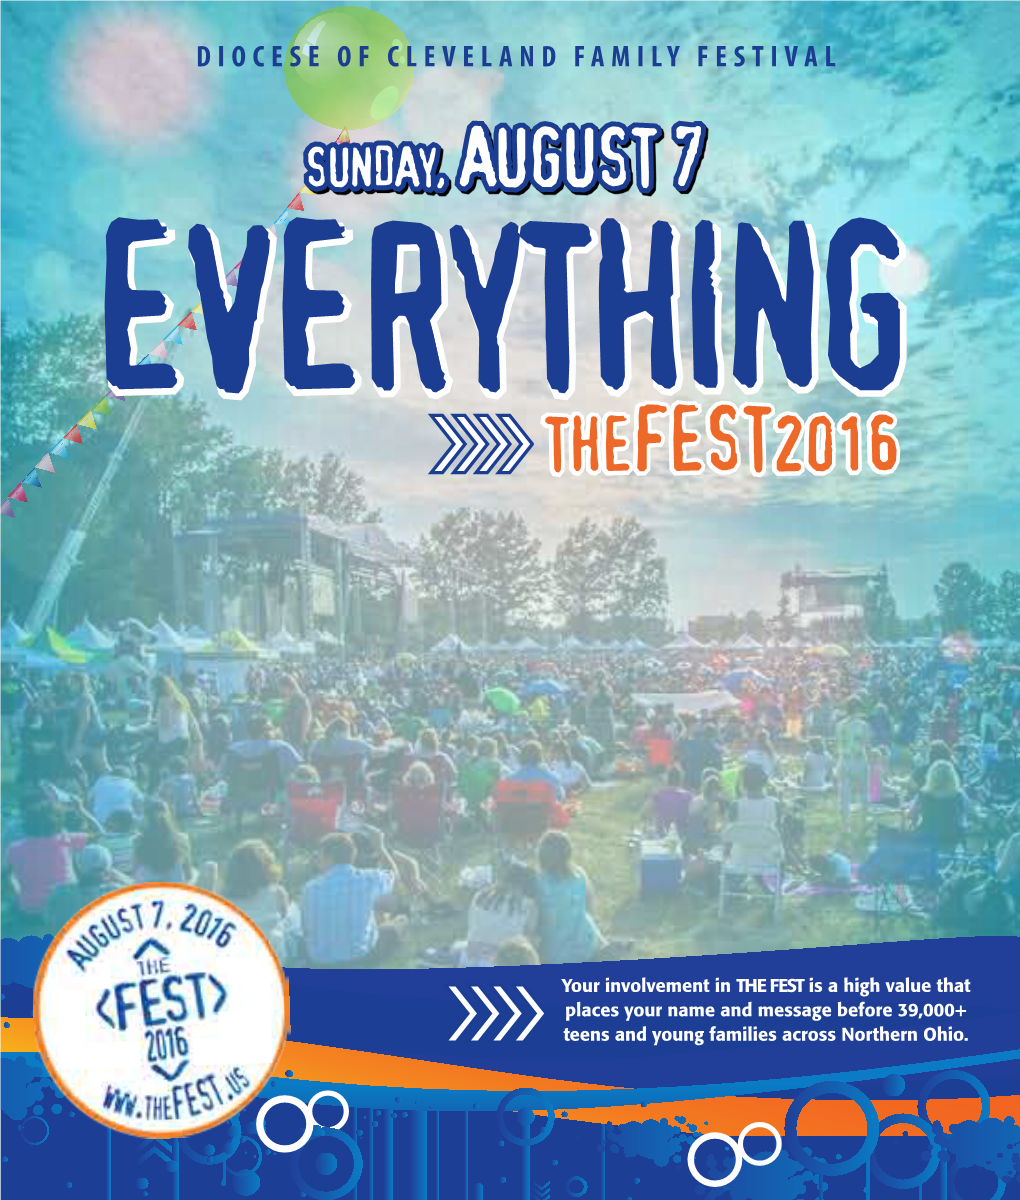 The FEST | the Event: WHY YOU SHOULD INVEST! the FEST Is a One Day Family Festival Sponsored by the Diocese of Cleveland